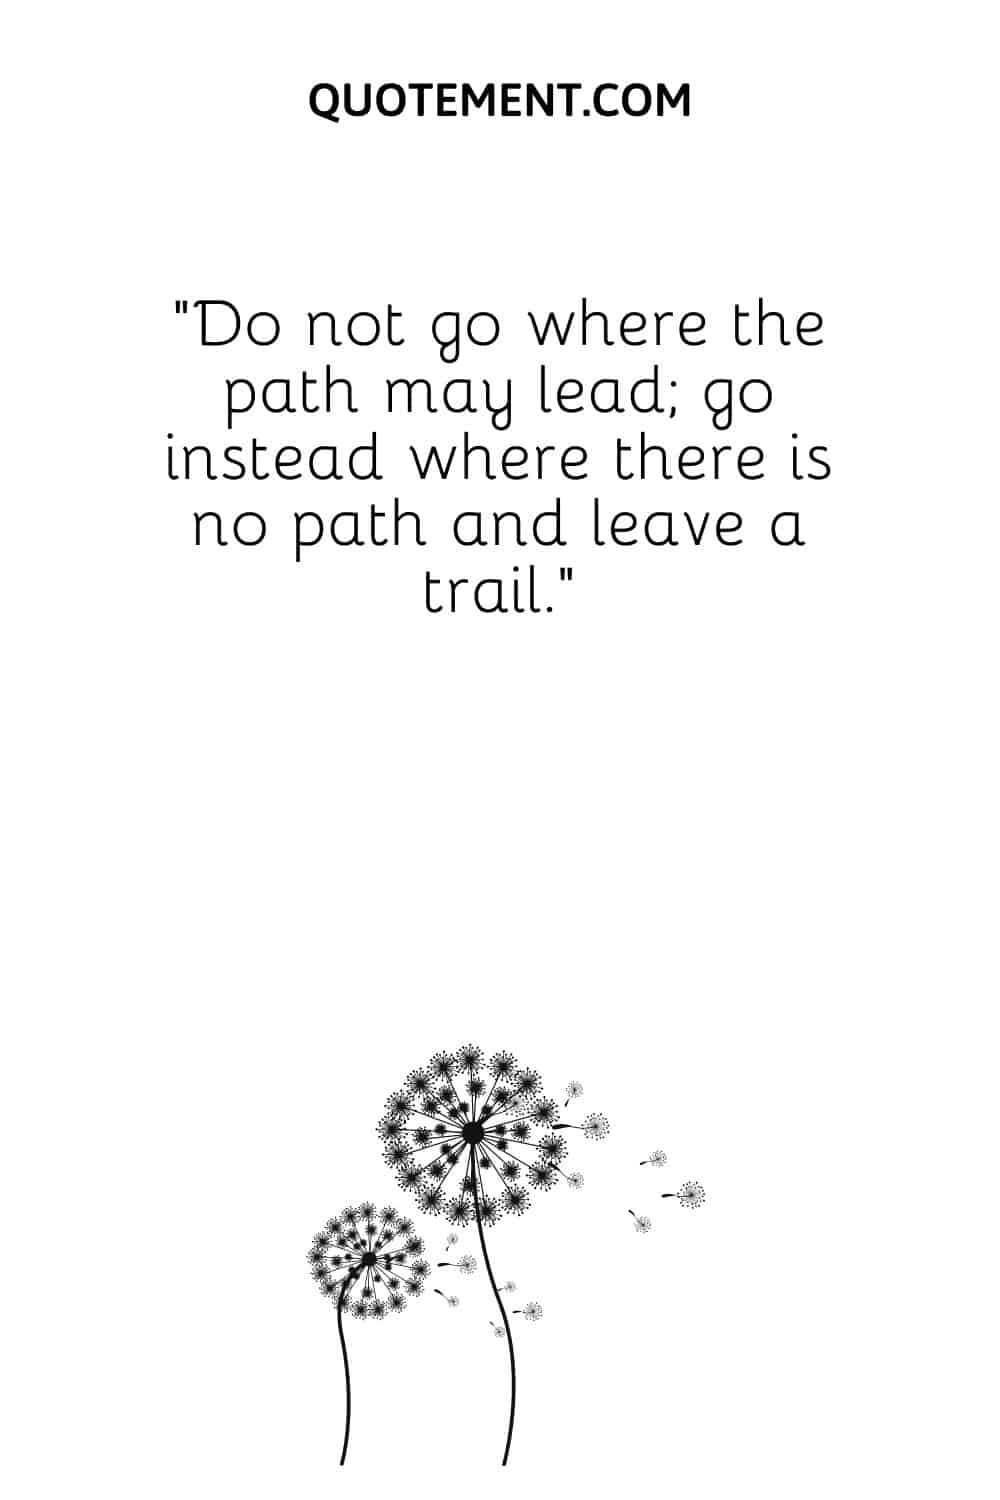 Do not go where the path may lead; go instead where there is no path and leave a trail